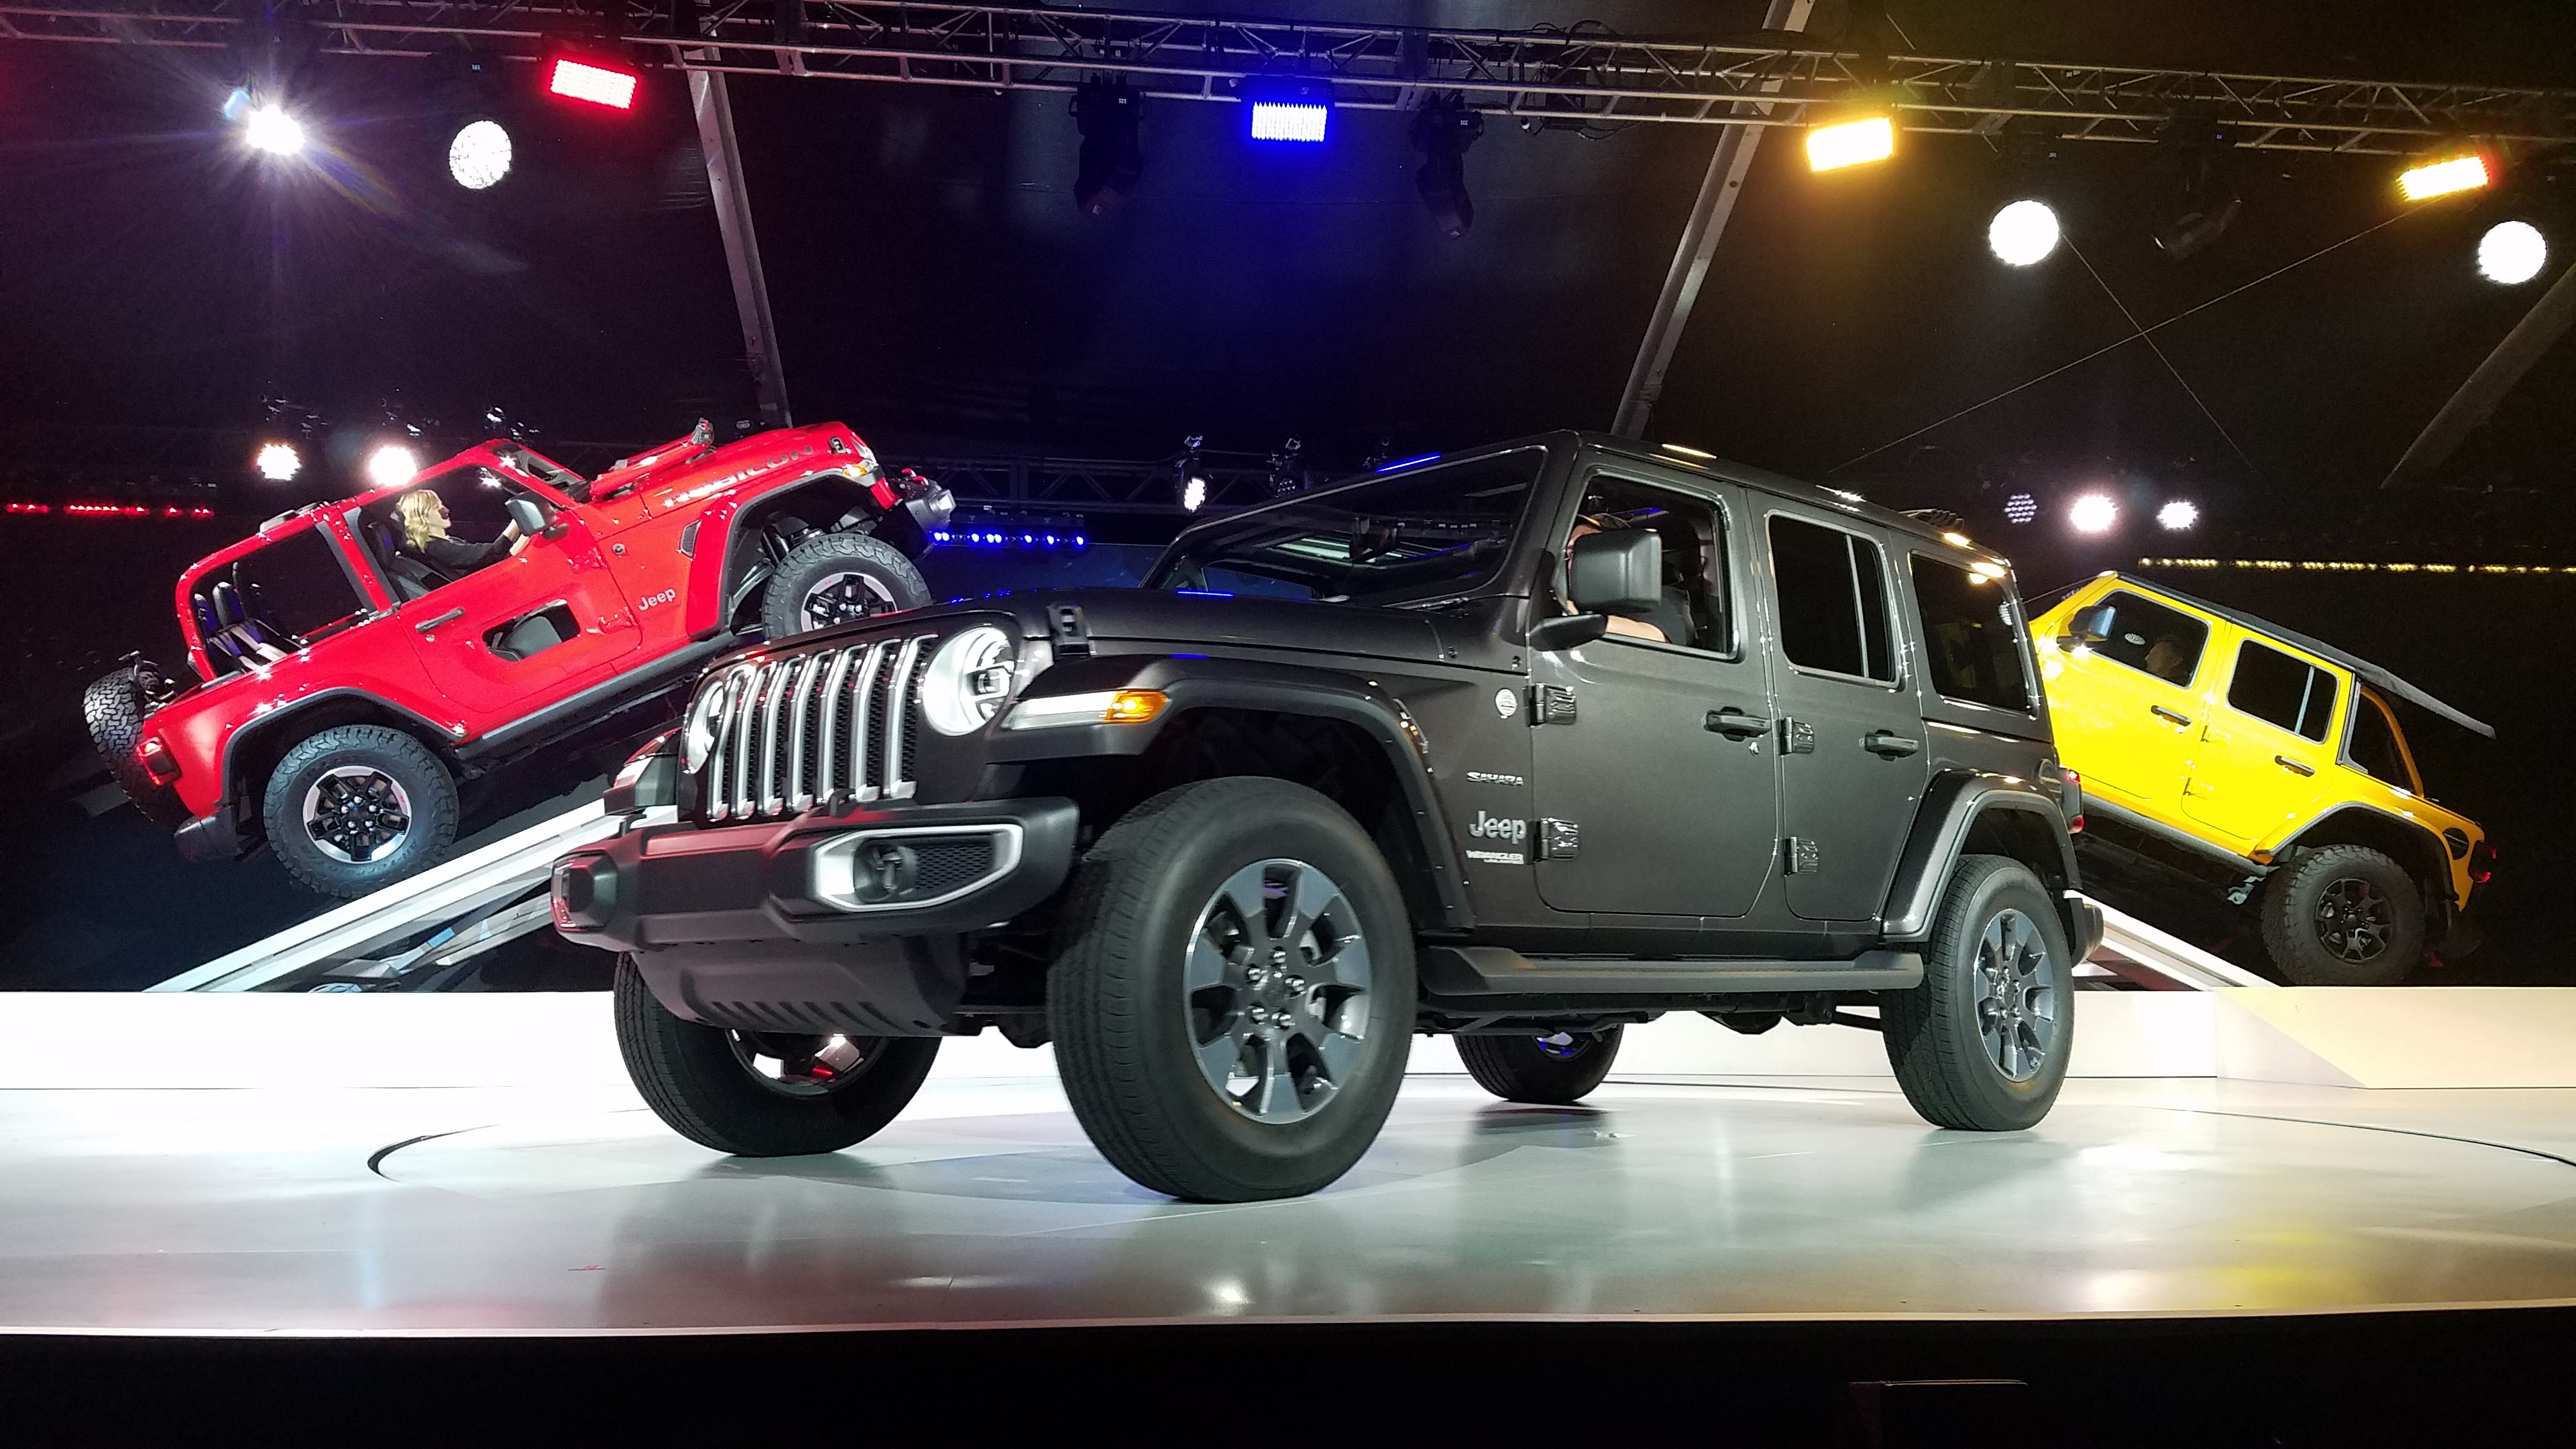 FCA Global introduces the 2018 Jeep Wrangler at the Los Angeles Auto Show